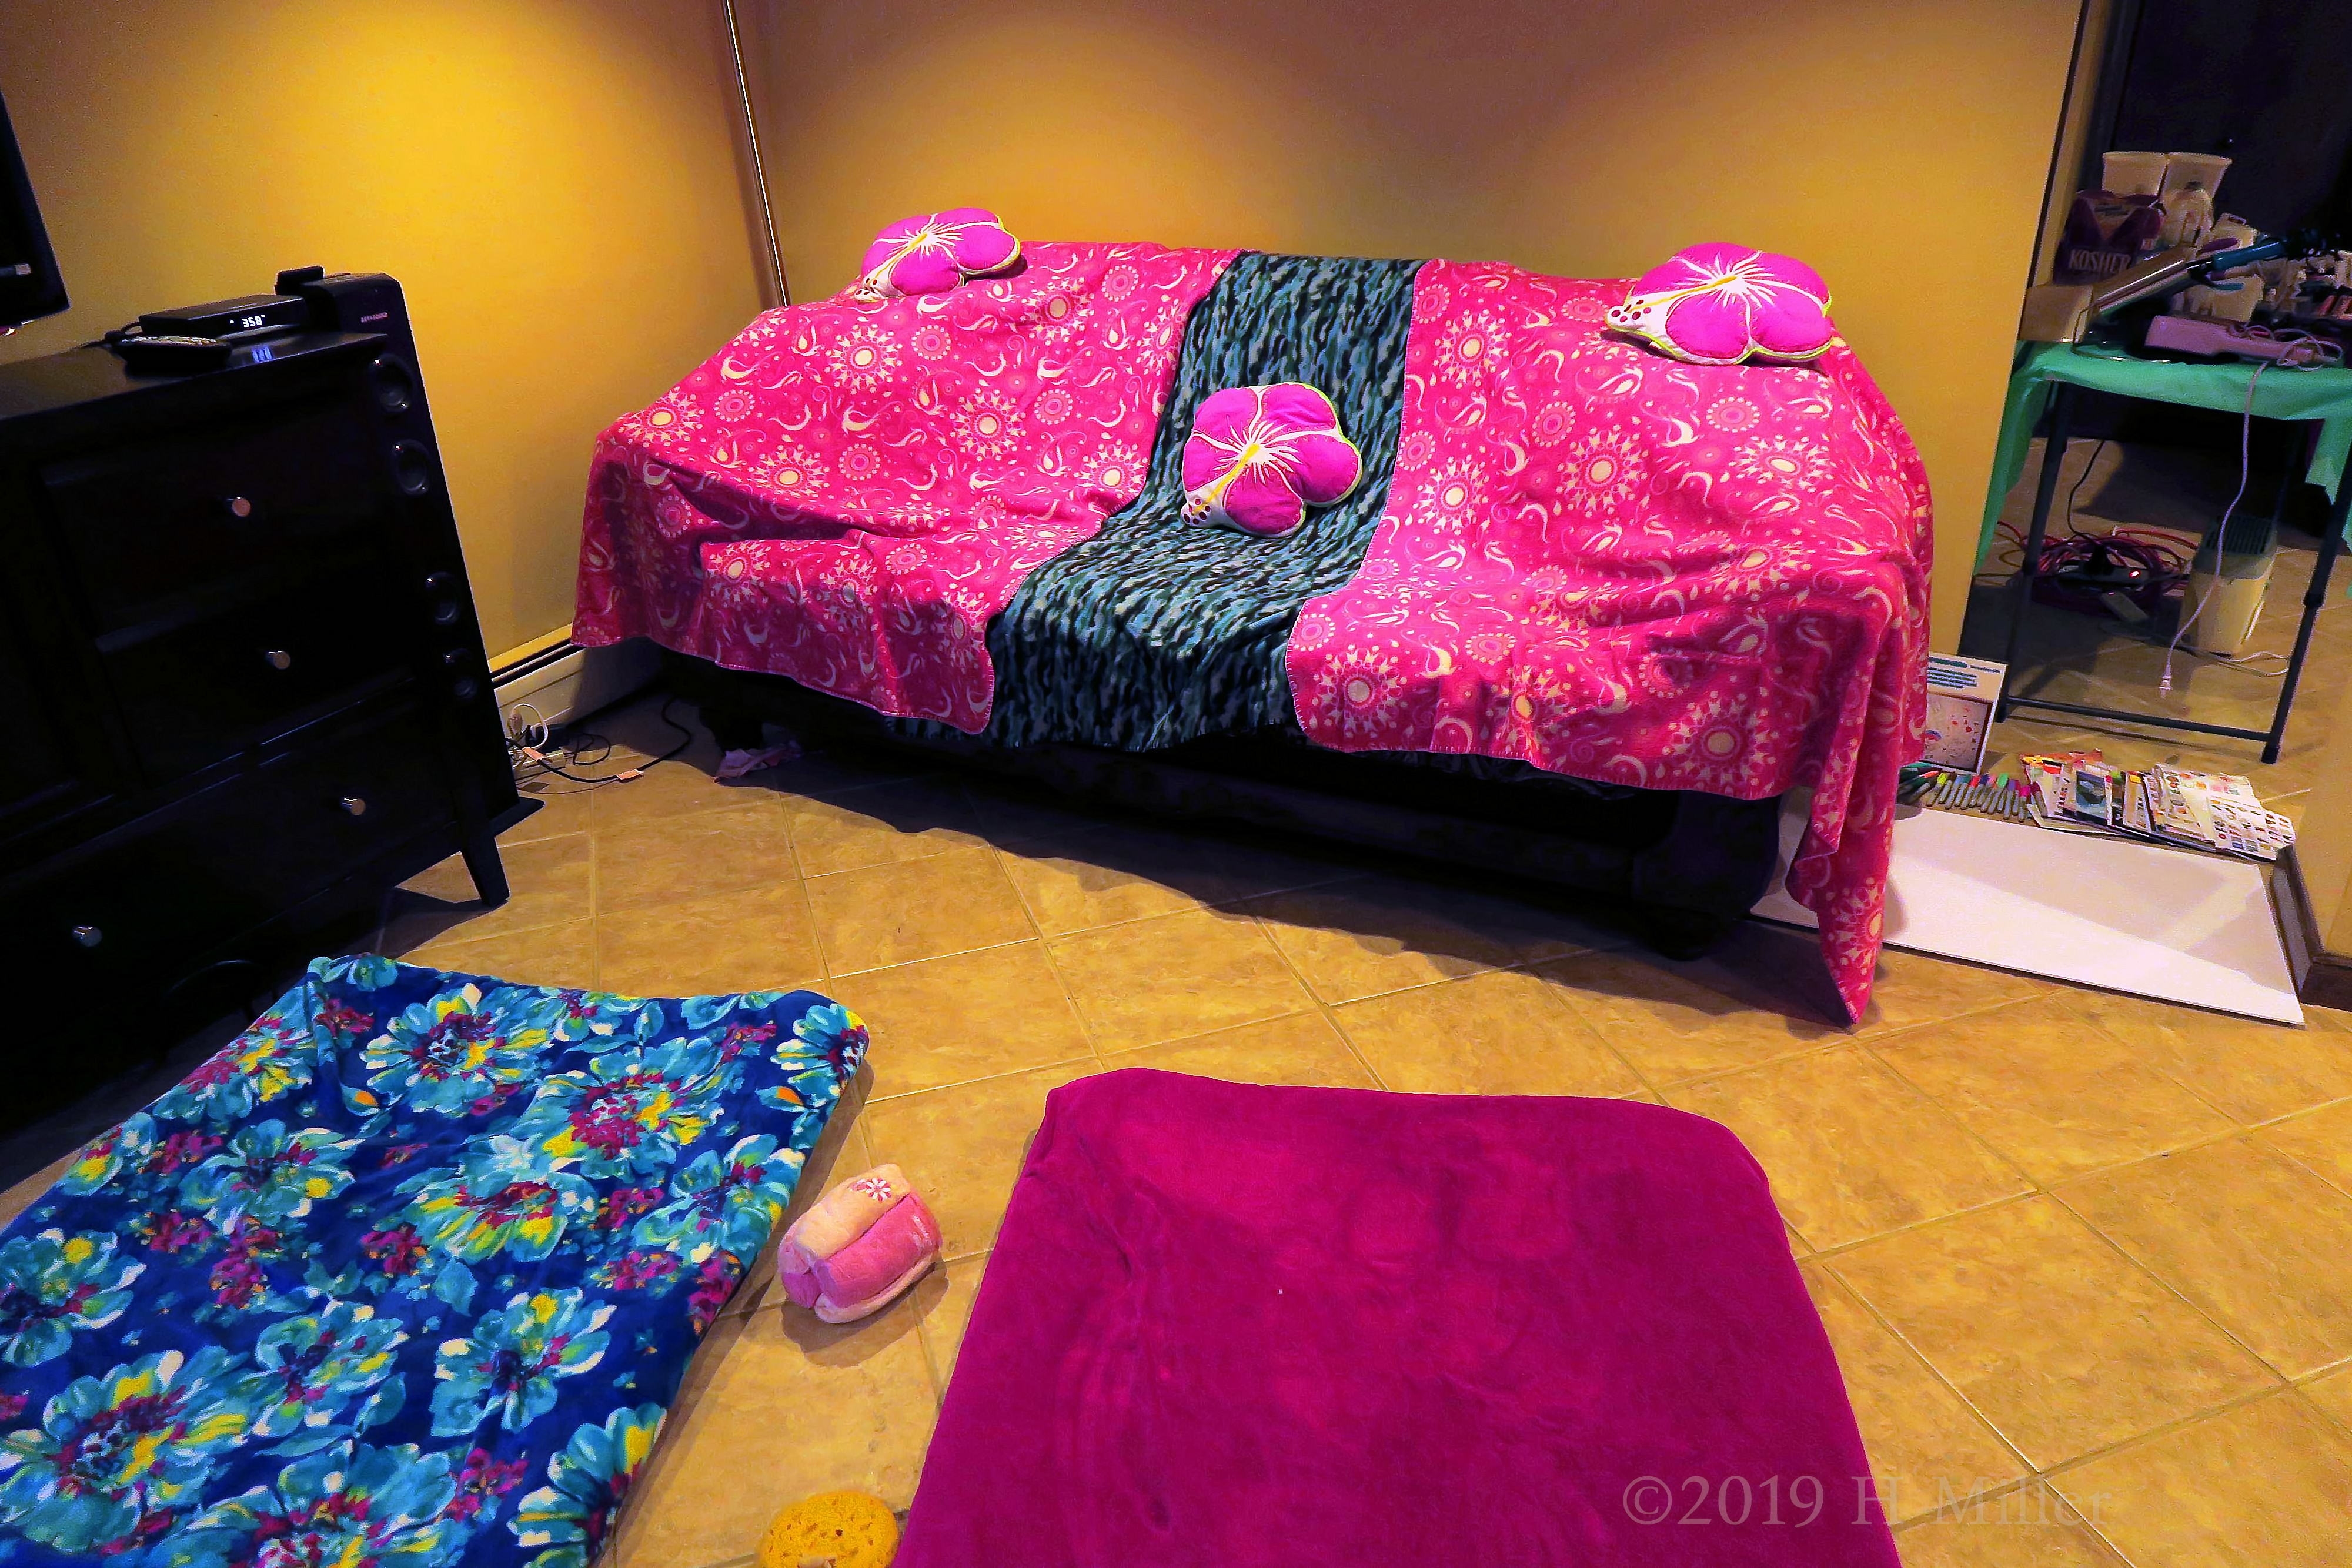 Cute Pink And Purple Spa Couches And Room Decor At The Spa Party For Girls! 